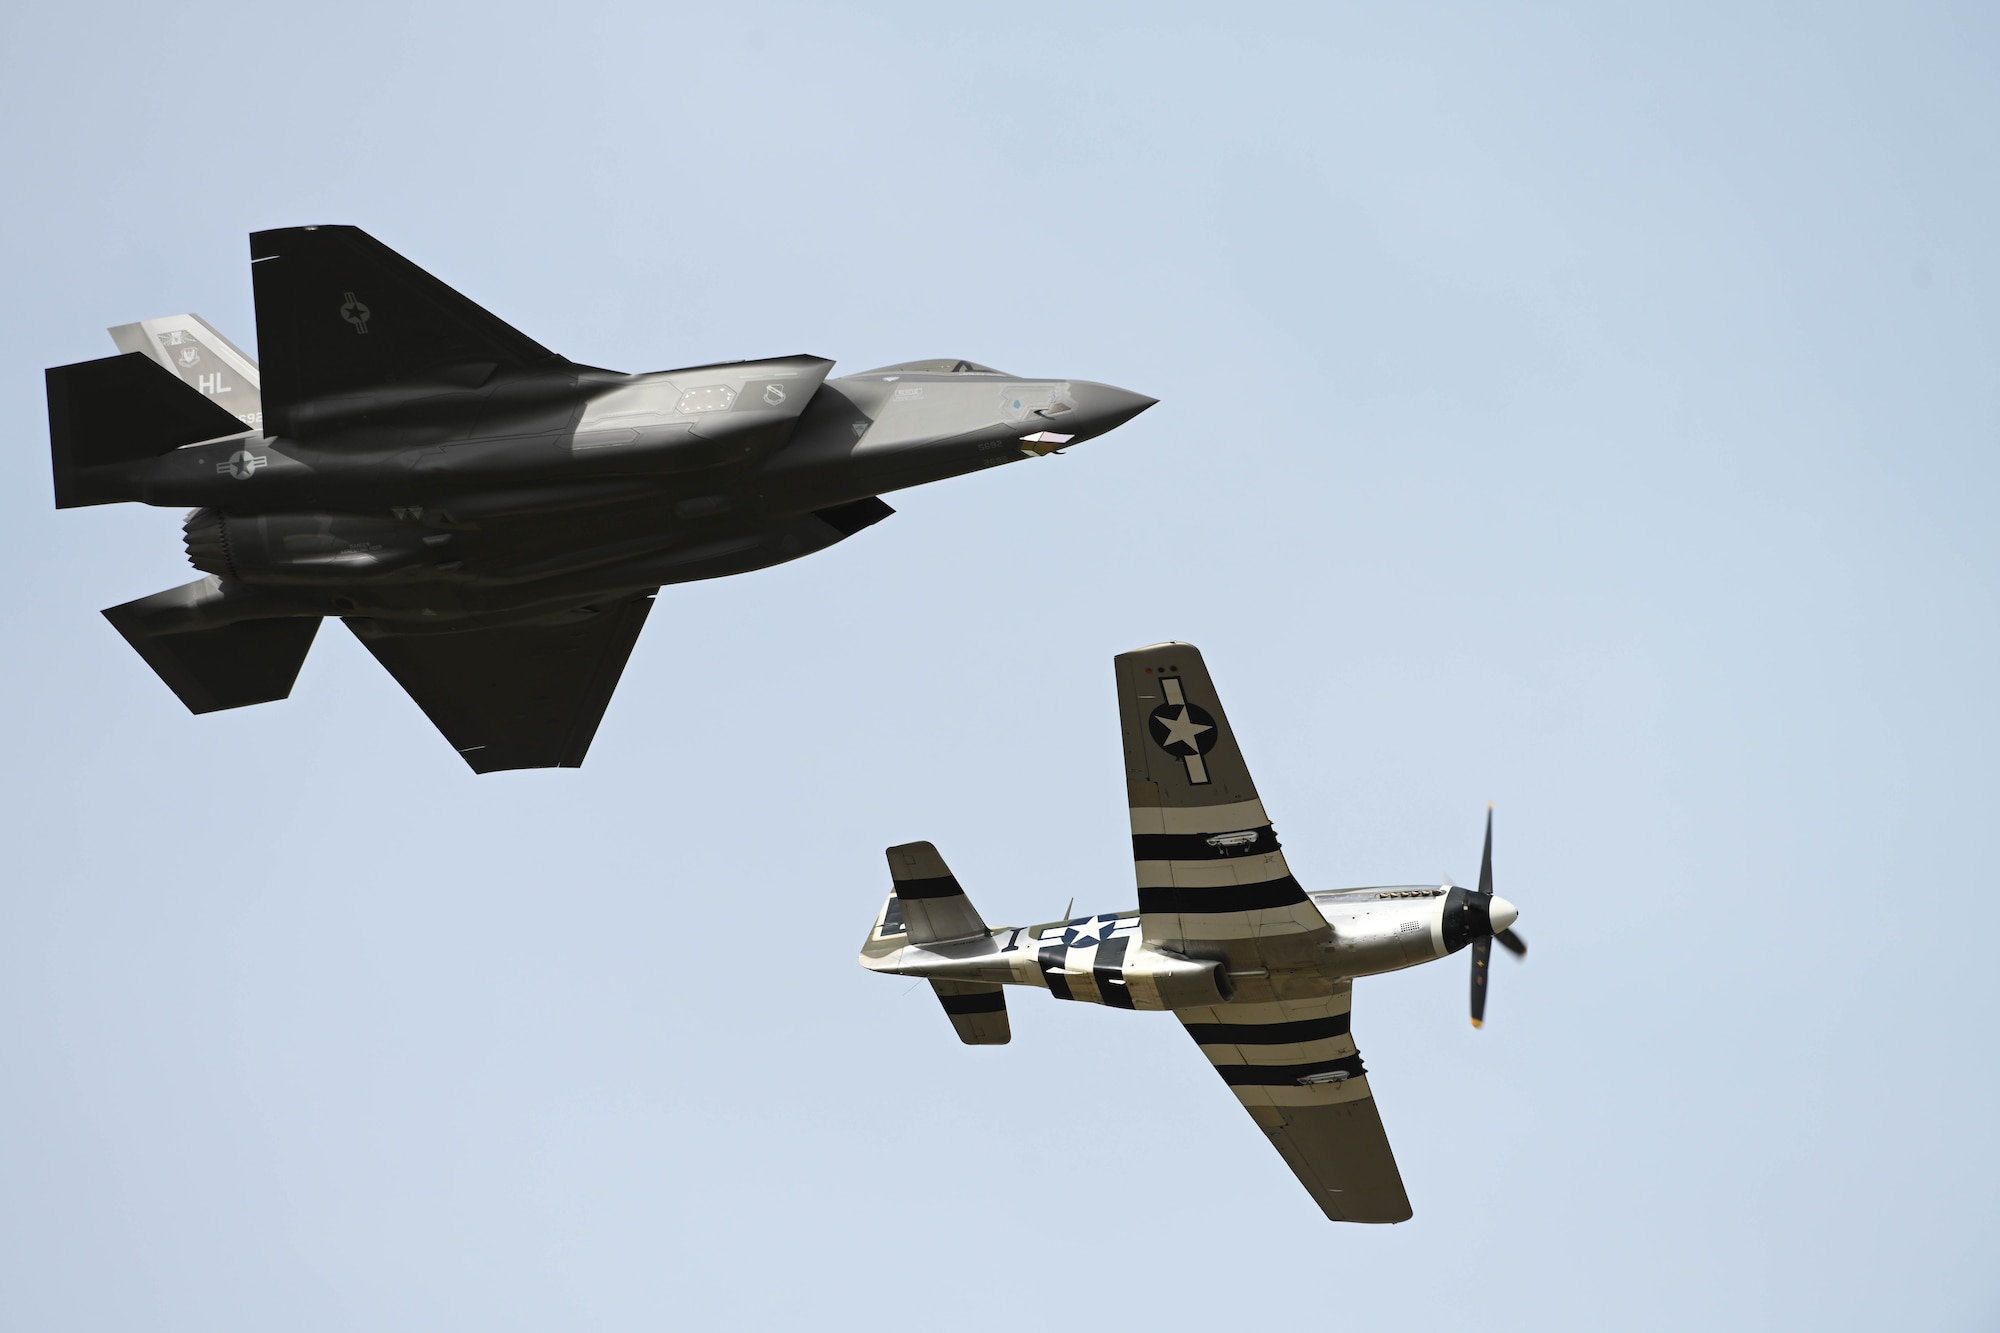 An F-35 Lightning II and a P-51 Mustang flying together